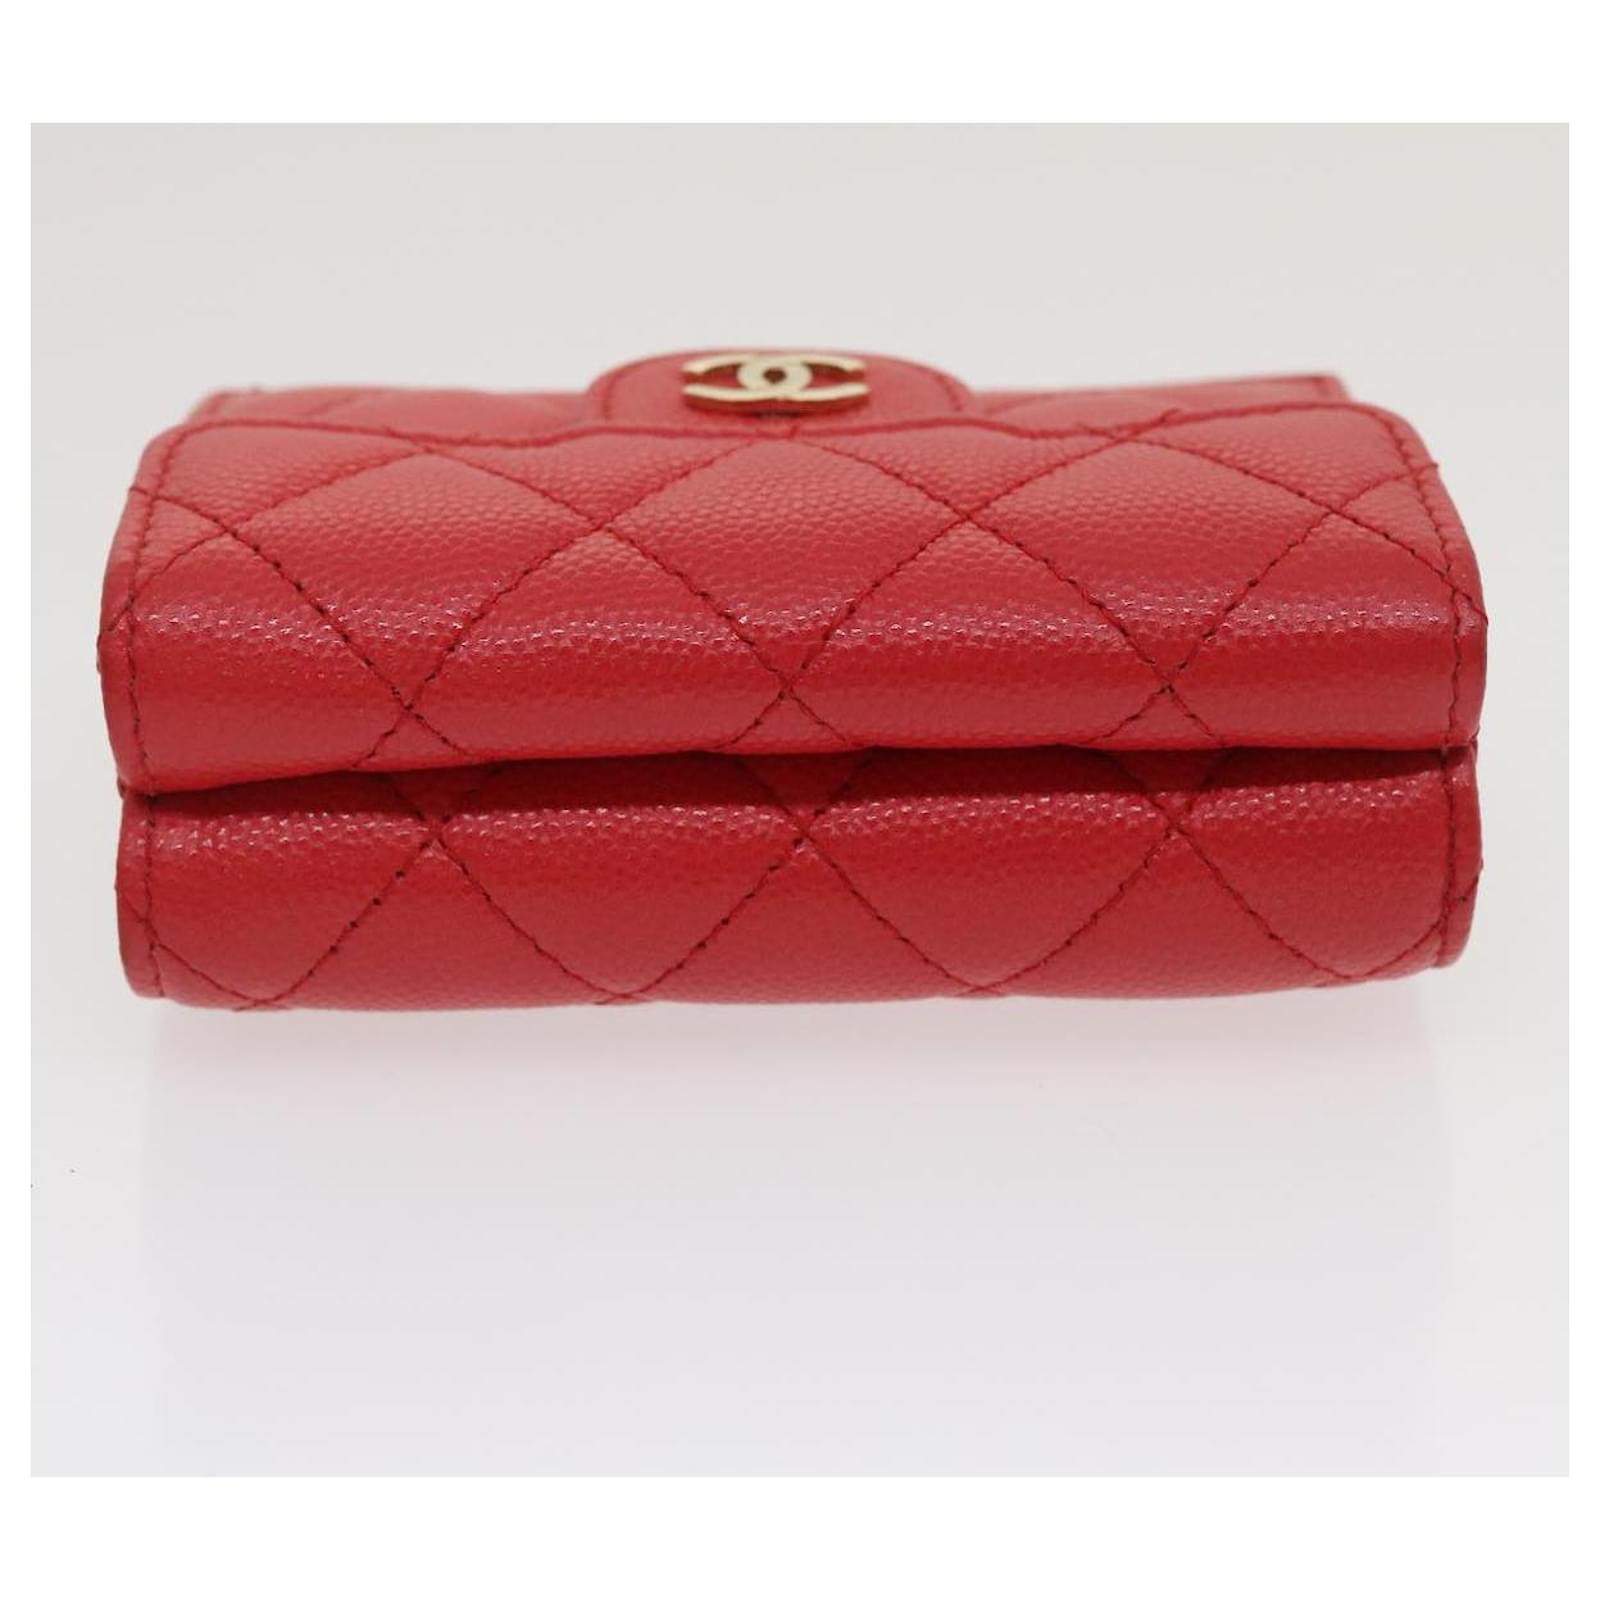 CHANEL Caviar Skin Matelasse Wallet Pink Red CC Auth 18734A